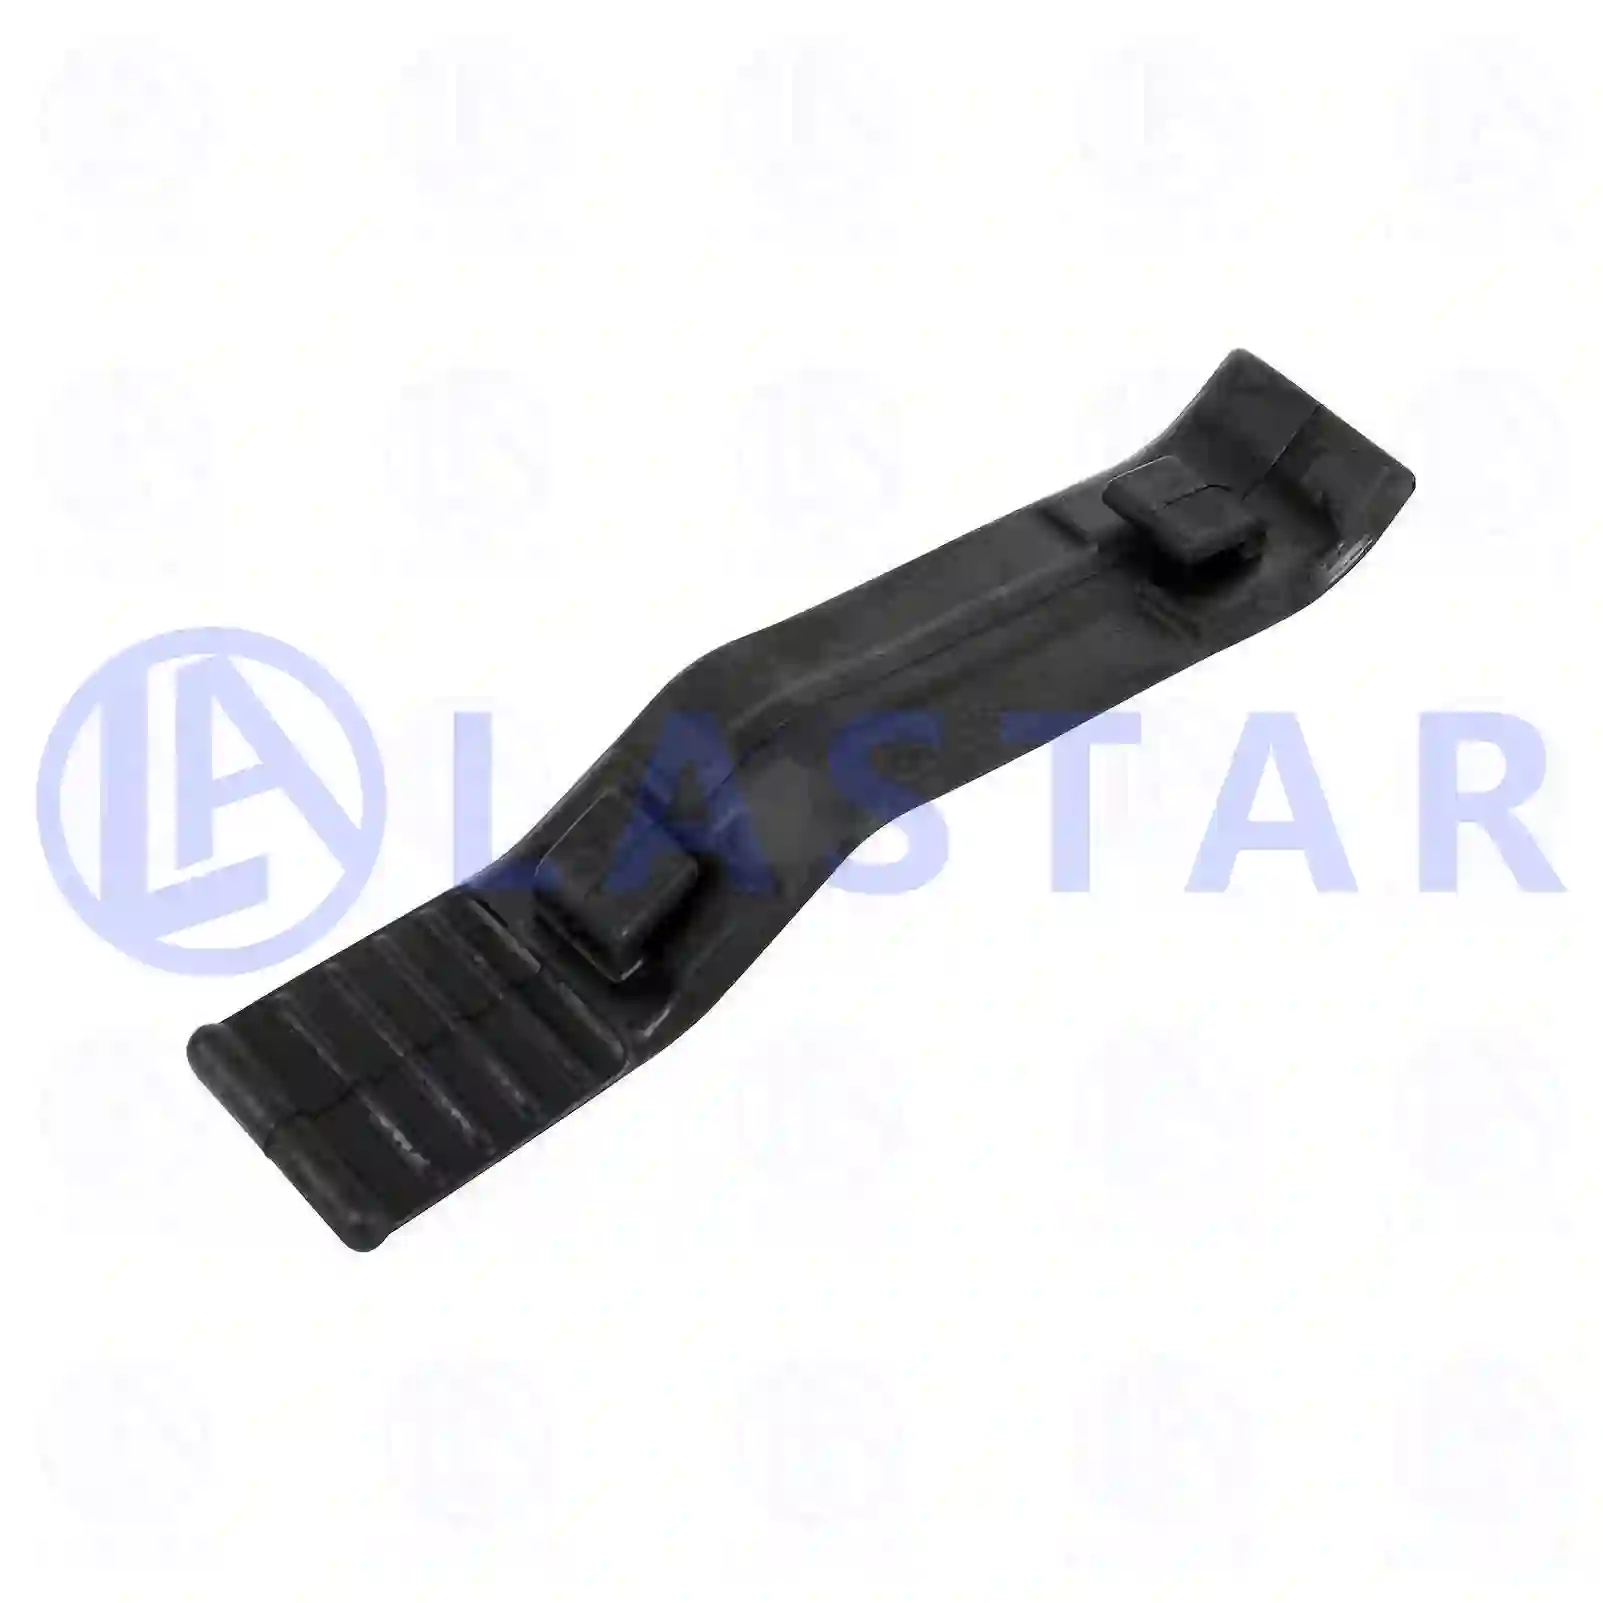 Tensioning band, 77719329, 9605200067, ZG61255-0008 ||  77719329 Lastar Spare Part | Truck Spare Parts, Auotomotive Spare Parts Tensioning band, 77719329, 9605200067, ZG61255-0008 ||  77719329 Lastar Spare Part | Truck Spare Parts, Auotomotive Spare Parts